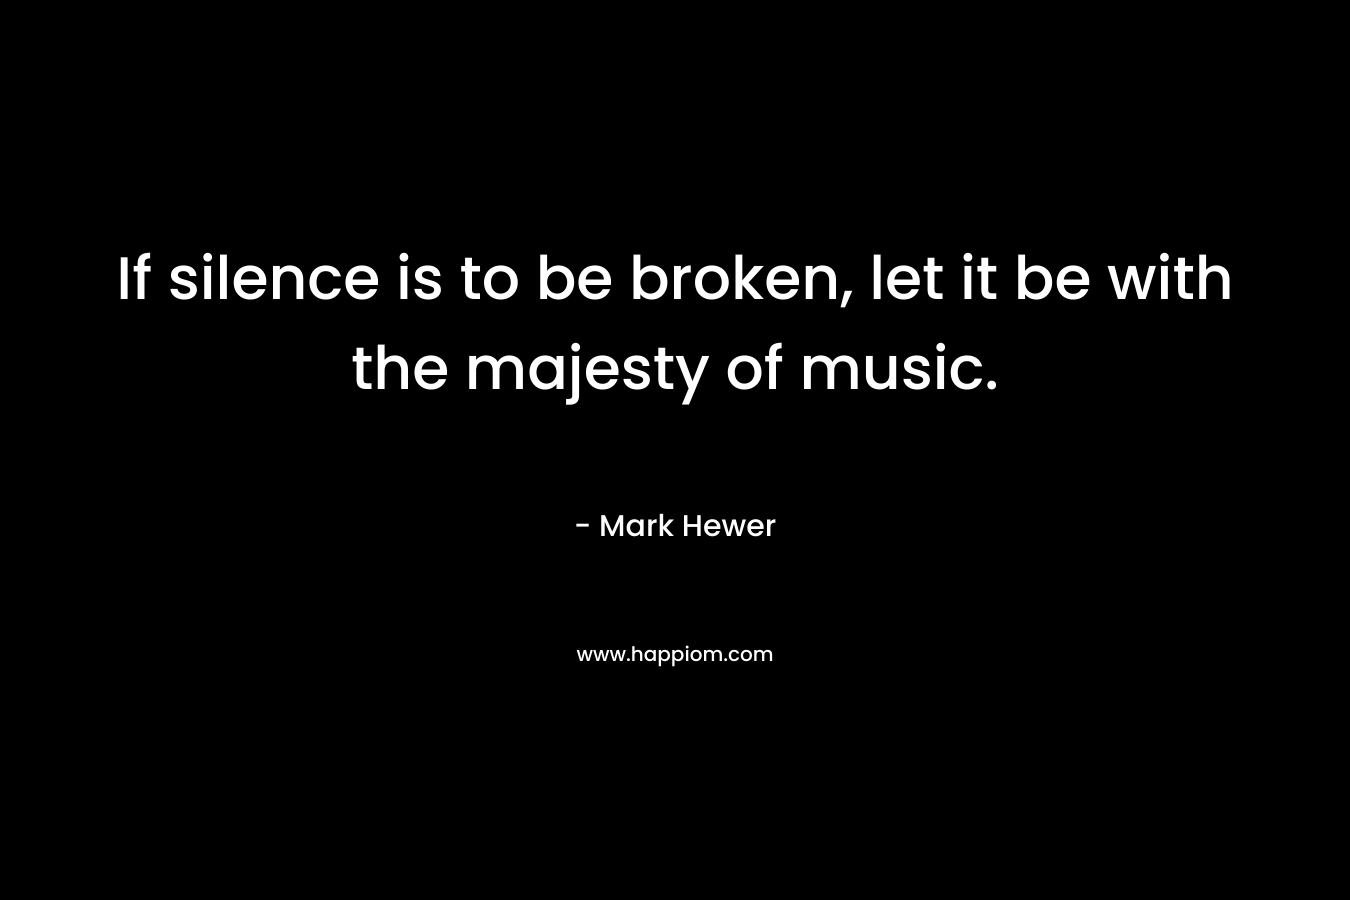 If silence is to be broken, let it be with the majesty of music. – Mark Hewer